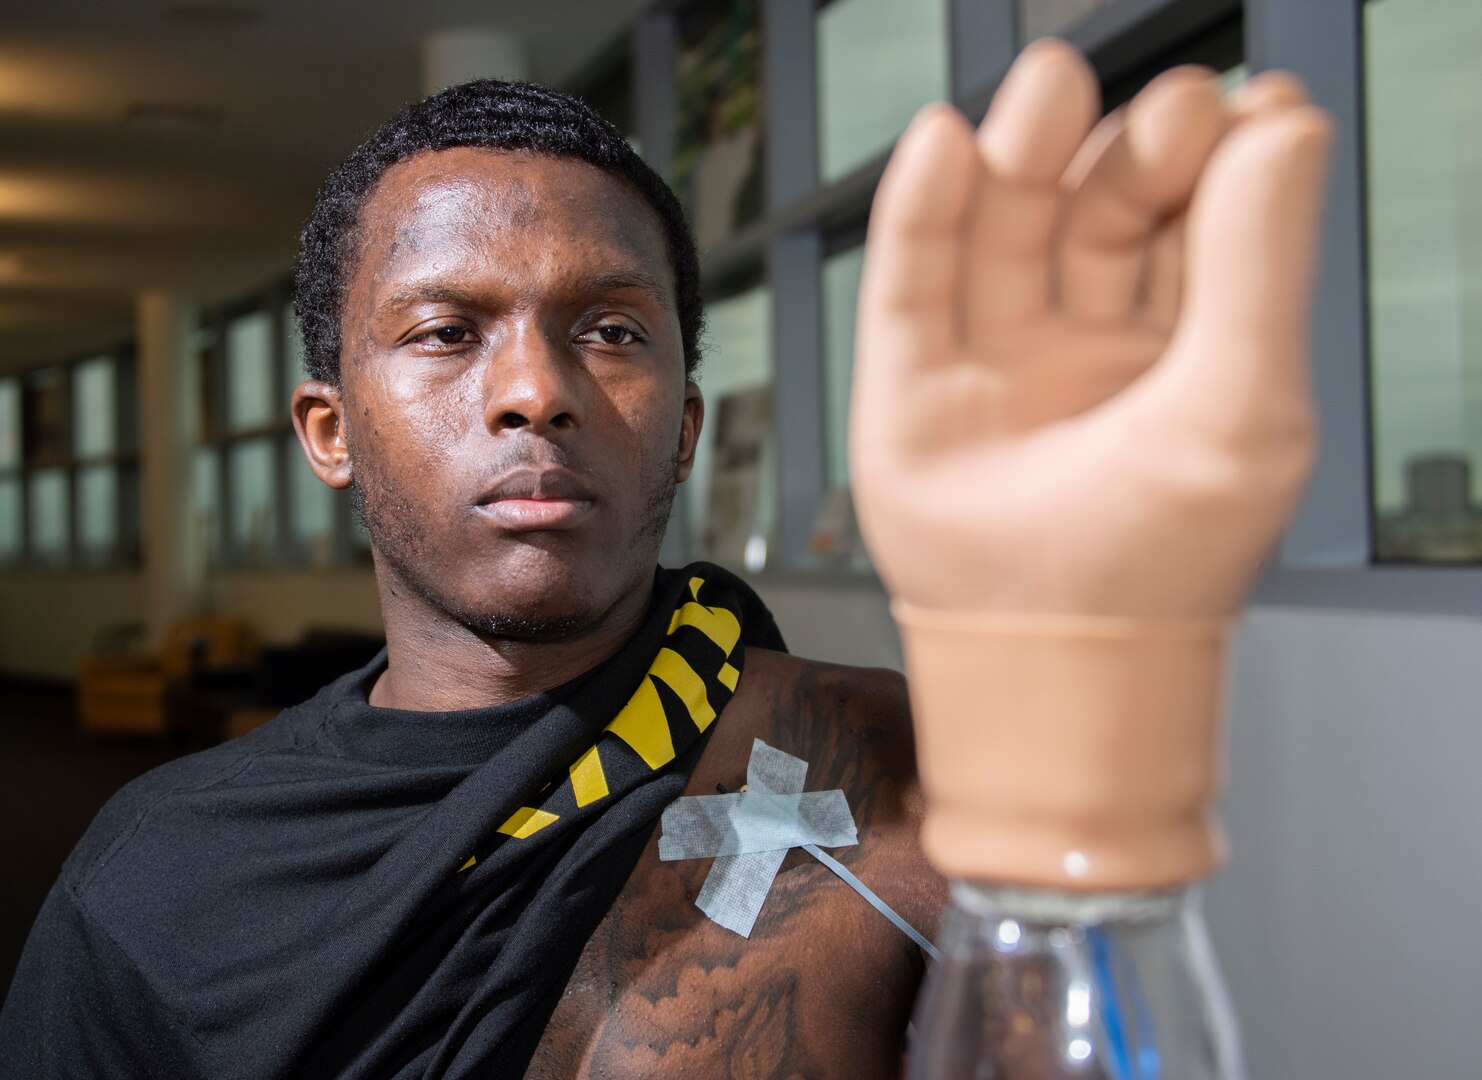 U.S. Army Staff Sgt. Kayshawn Porterfield practices using a myoelectric prosthesis at Brooke Army Medical Center’s Center for the Intrepid, Joint Base San Antonio-Fort Sam Houston Feb. 21. A myoelectric-controlled prosthesis is an externally powered artificial limb that the user controls with electrical signals generated naturally with his own muscles.